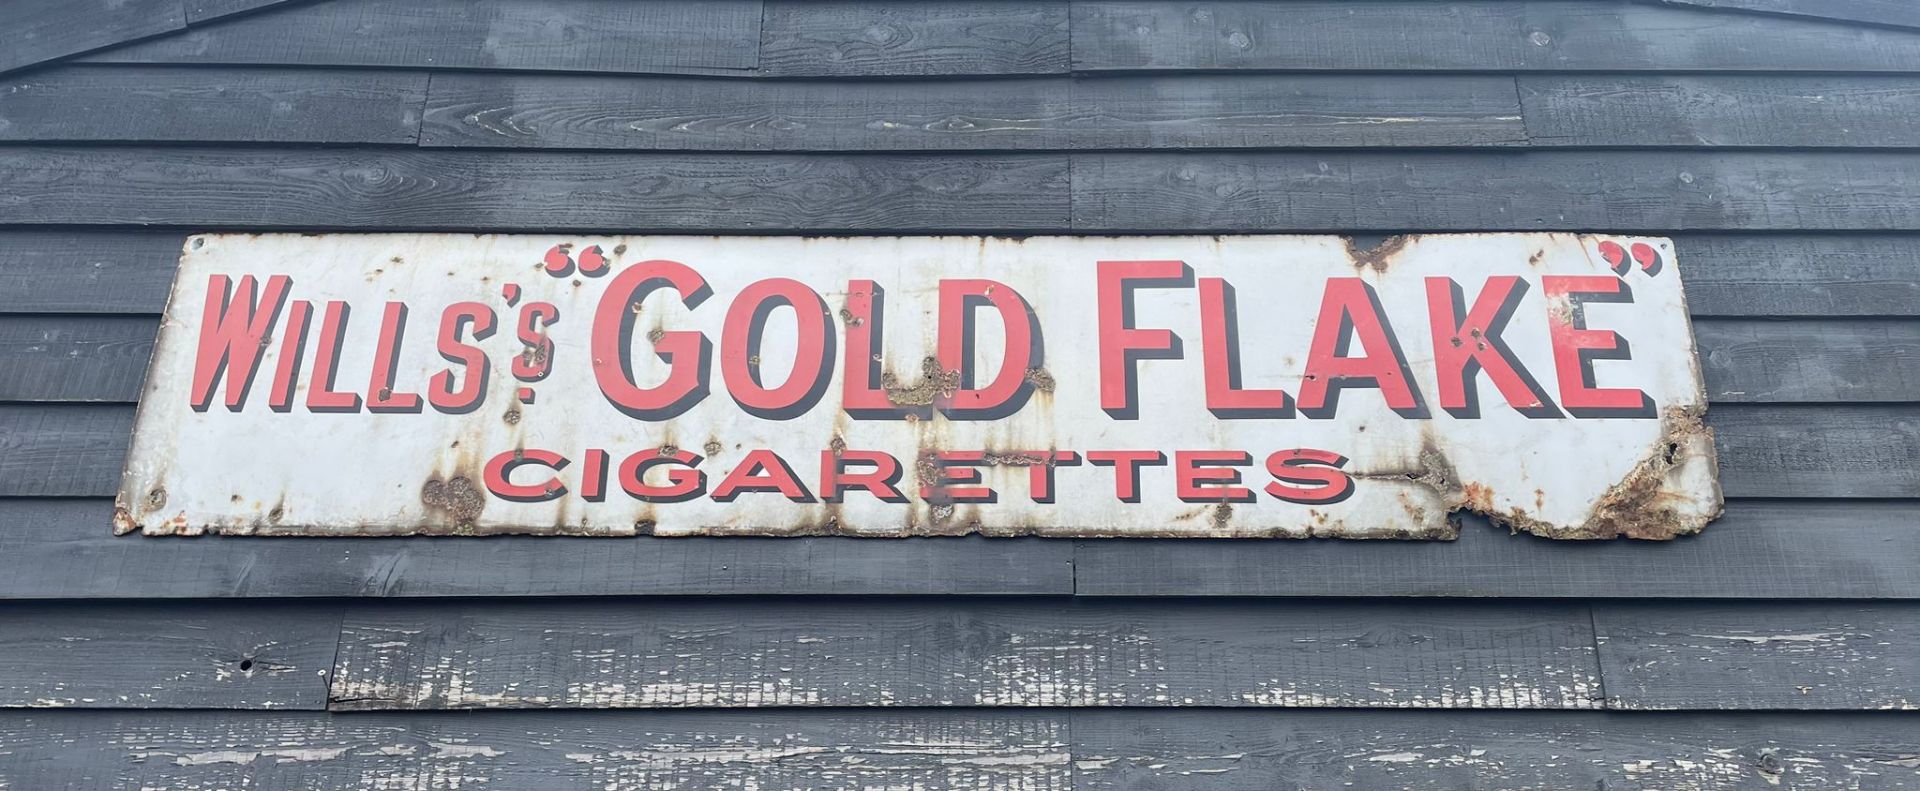 wills Gold Flake Cigarettes Sign - Image 5 of 5